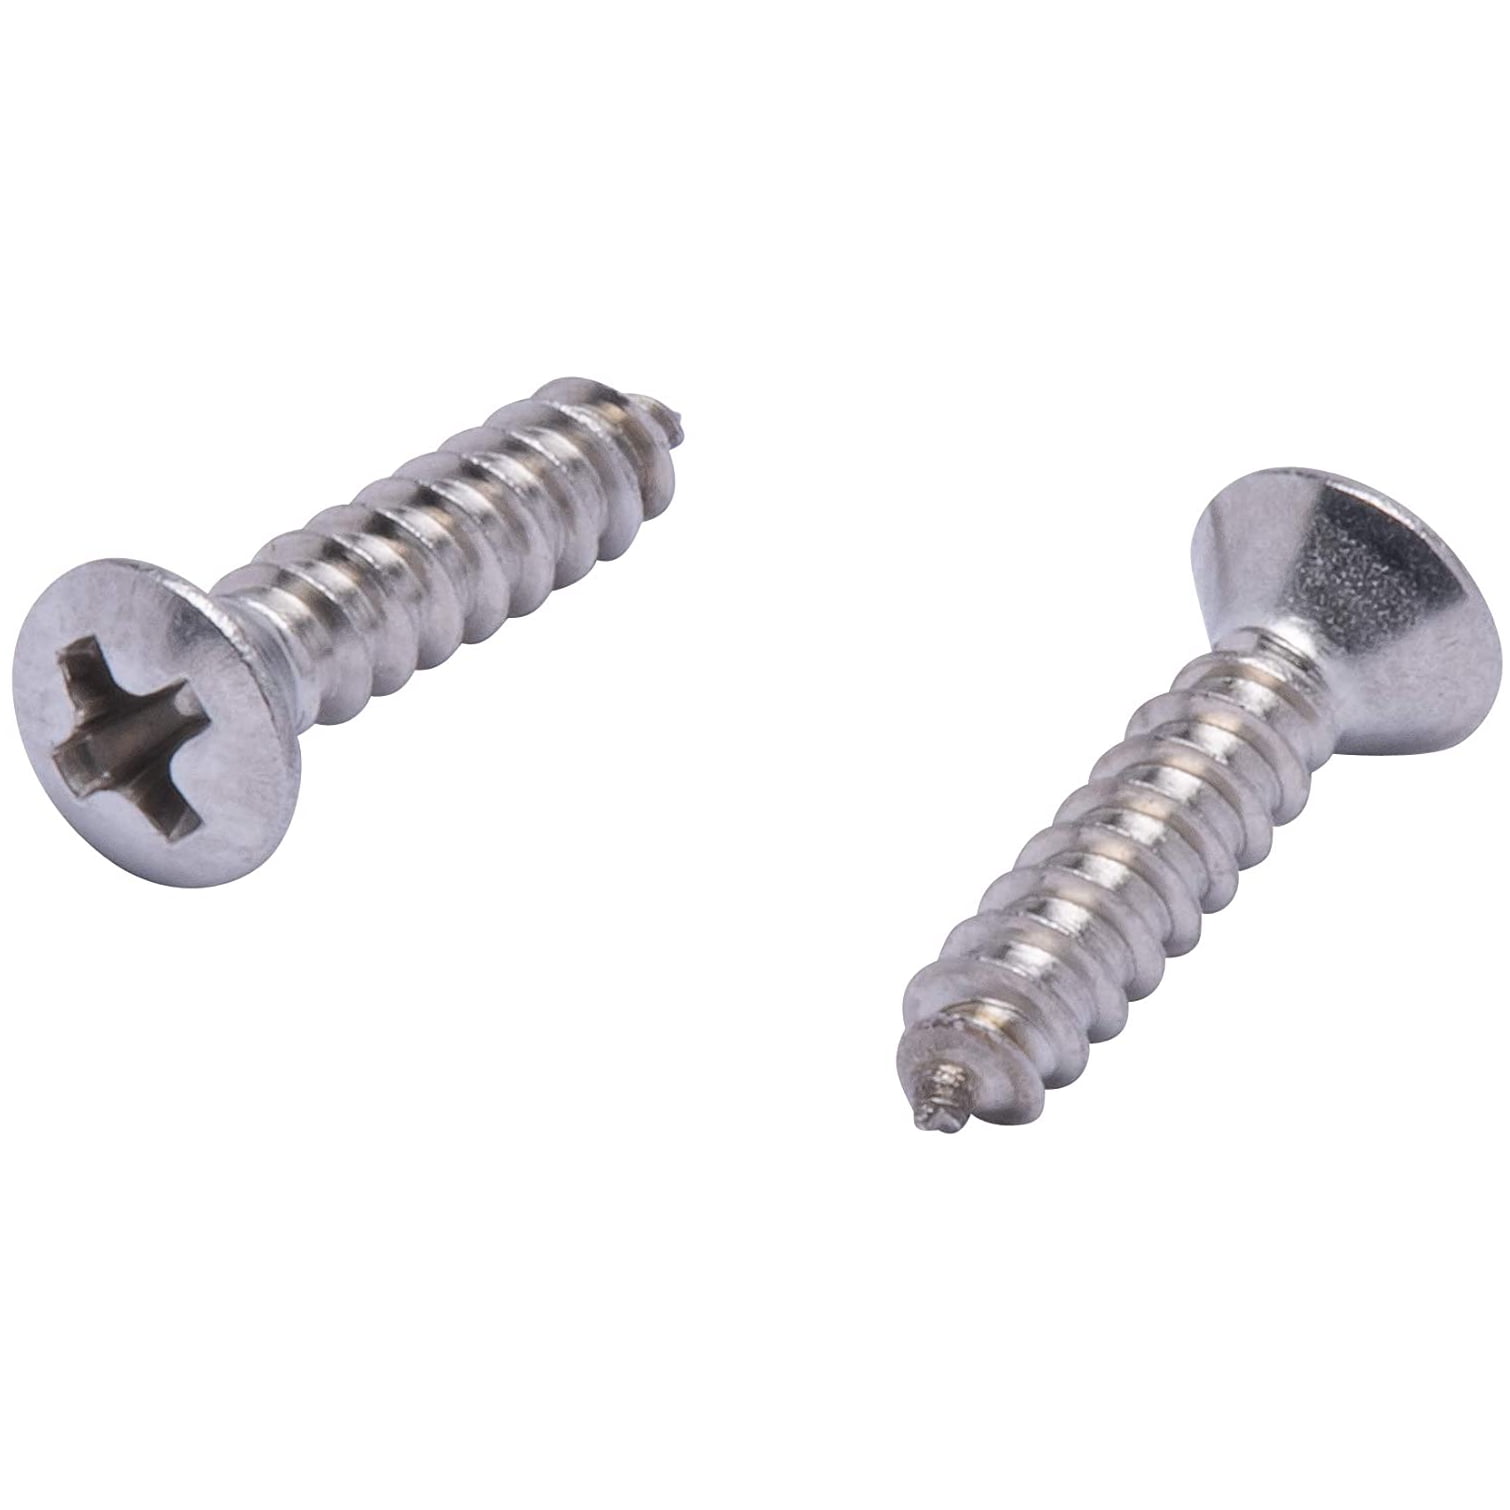 #10 x 3/4" Oval Head Wood Screws Slotted Stainless Steel Quantity 100 